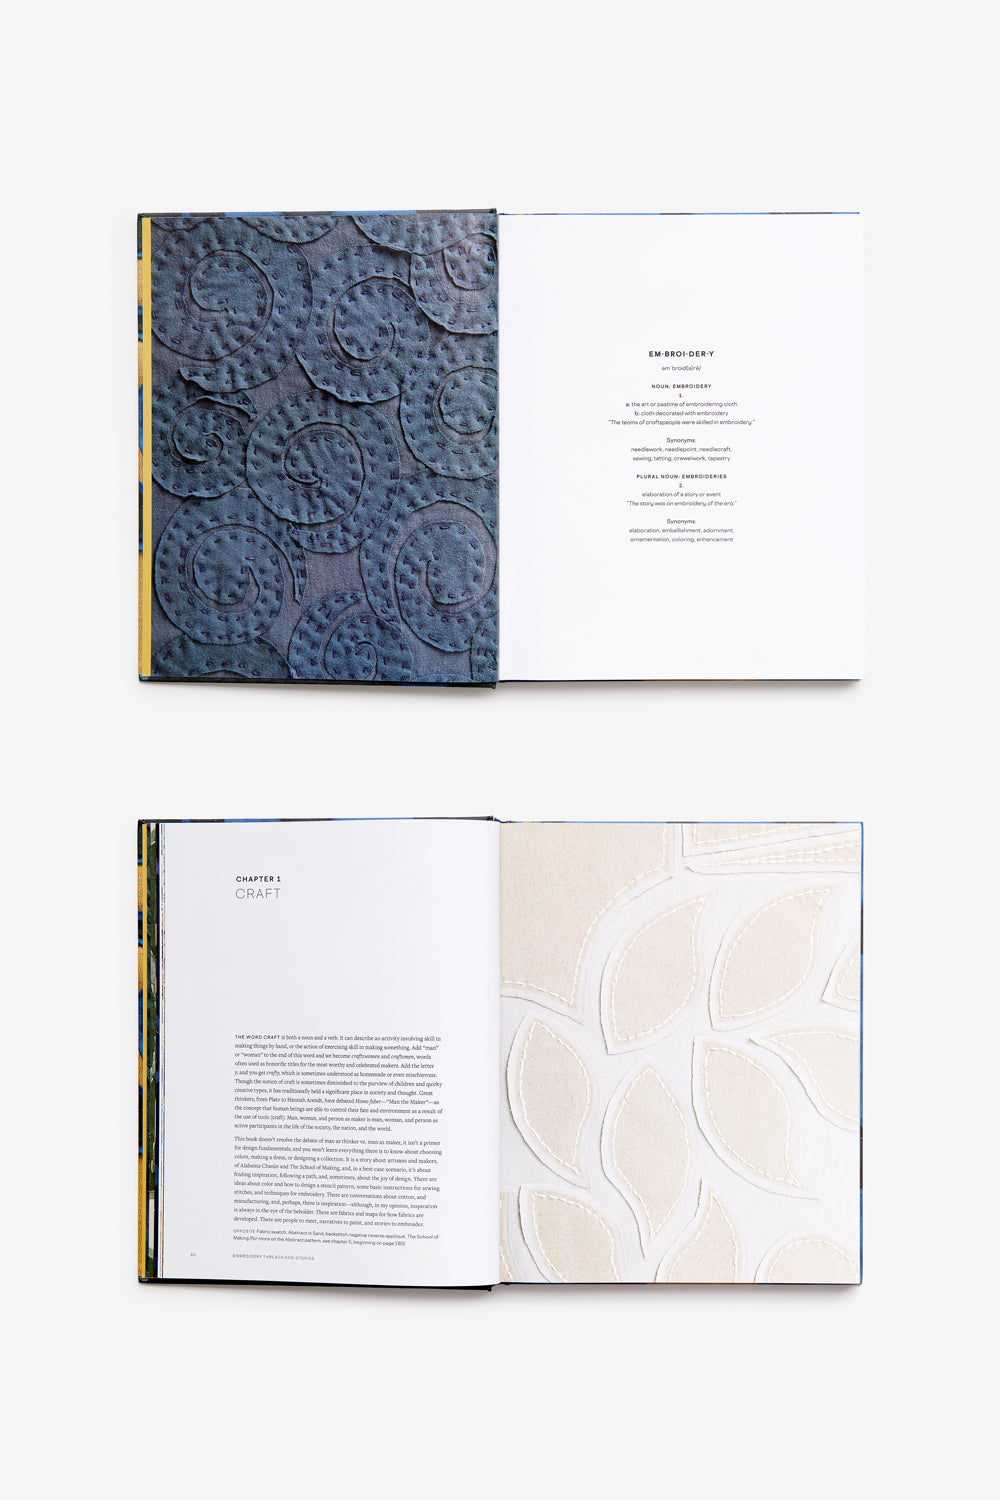 Pages from Embroidery: Threads and Stories by Natalie Chanin.